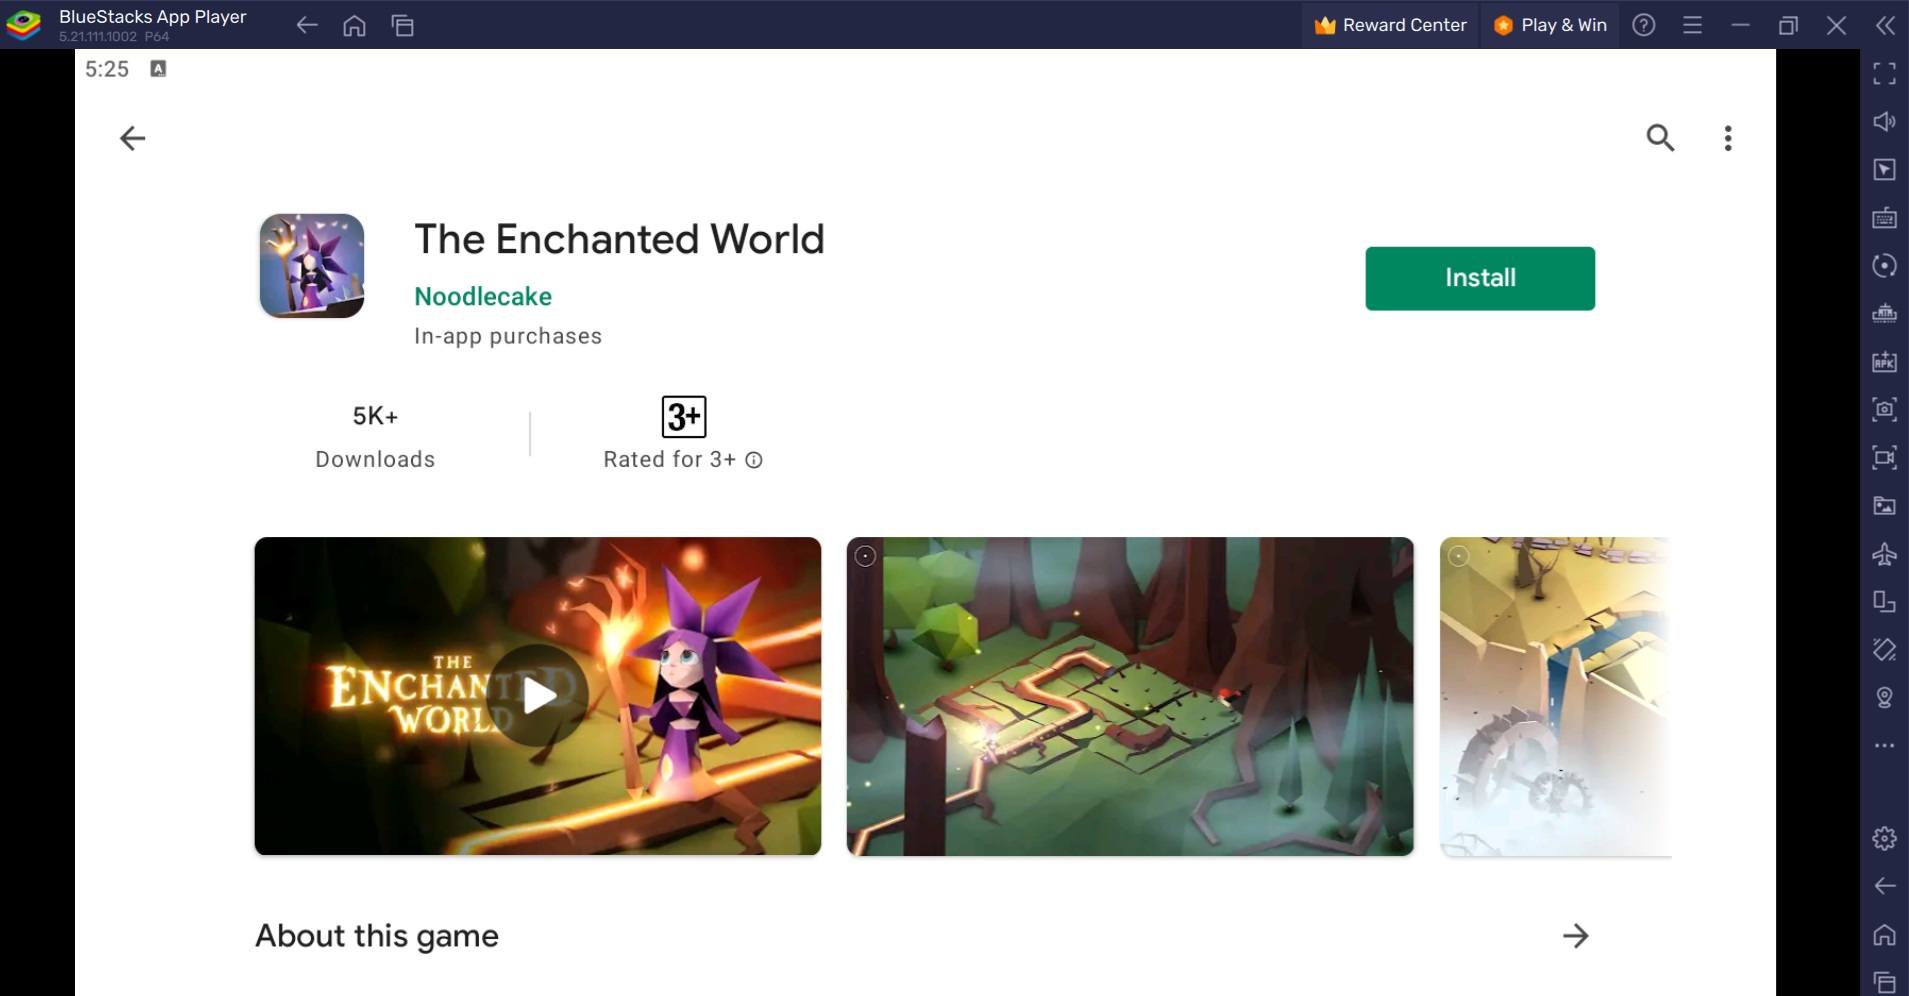 How to Play The Enchanted World on PC with BlueStacks